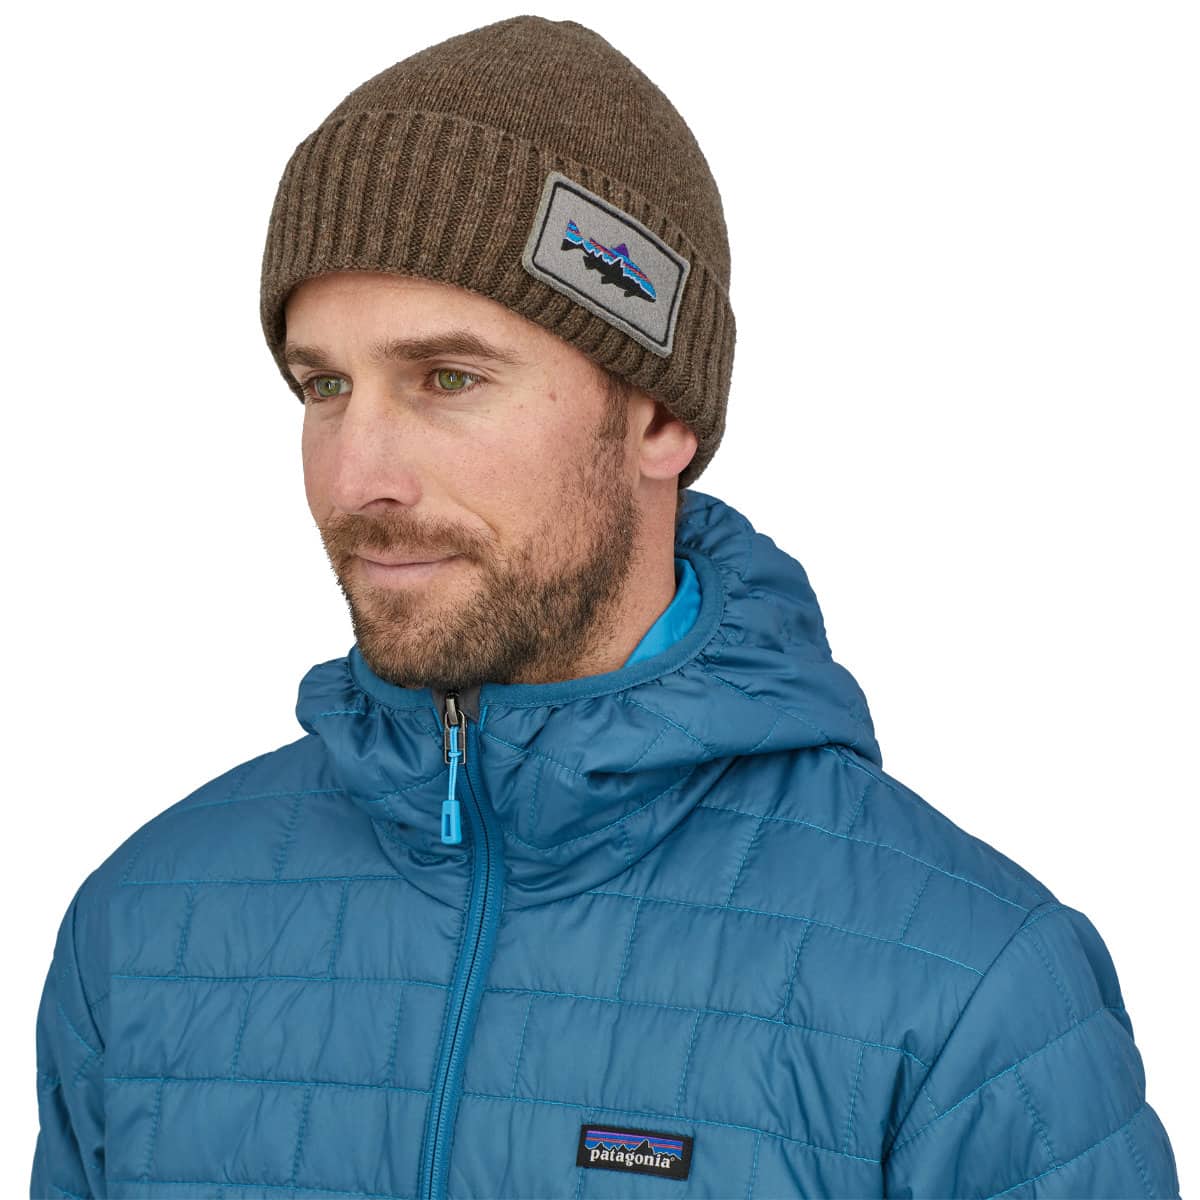 Patagonia Brodeo Beanie - Fitz Roy Trout Patch: Ash Tan